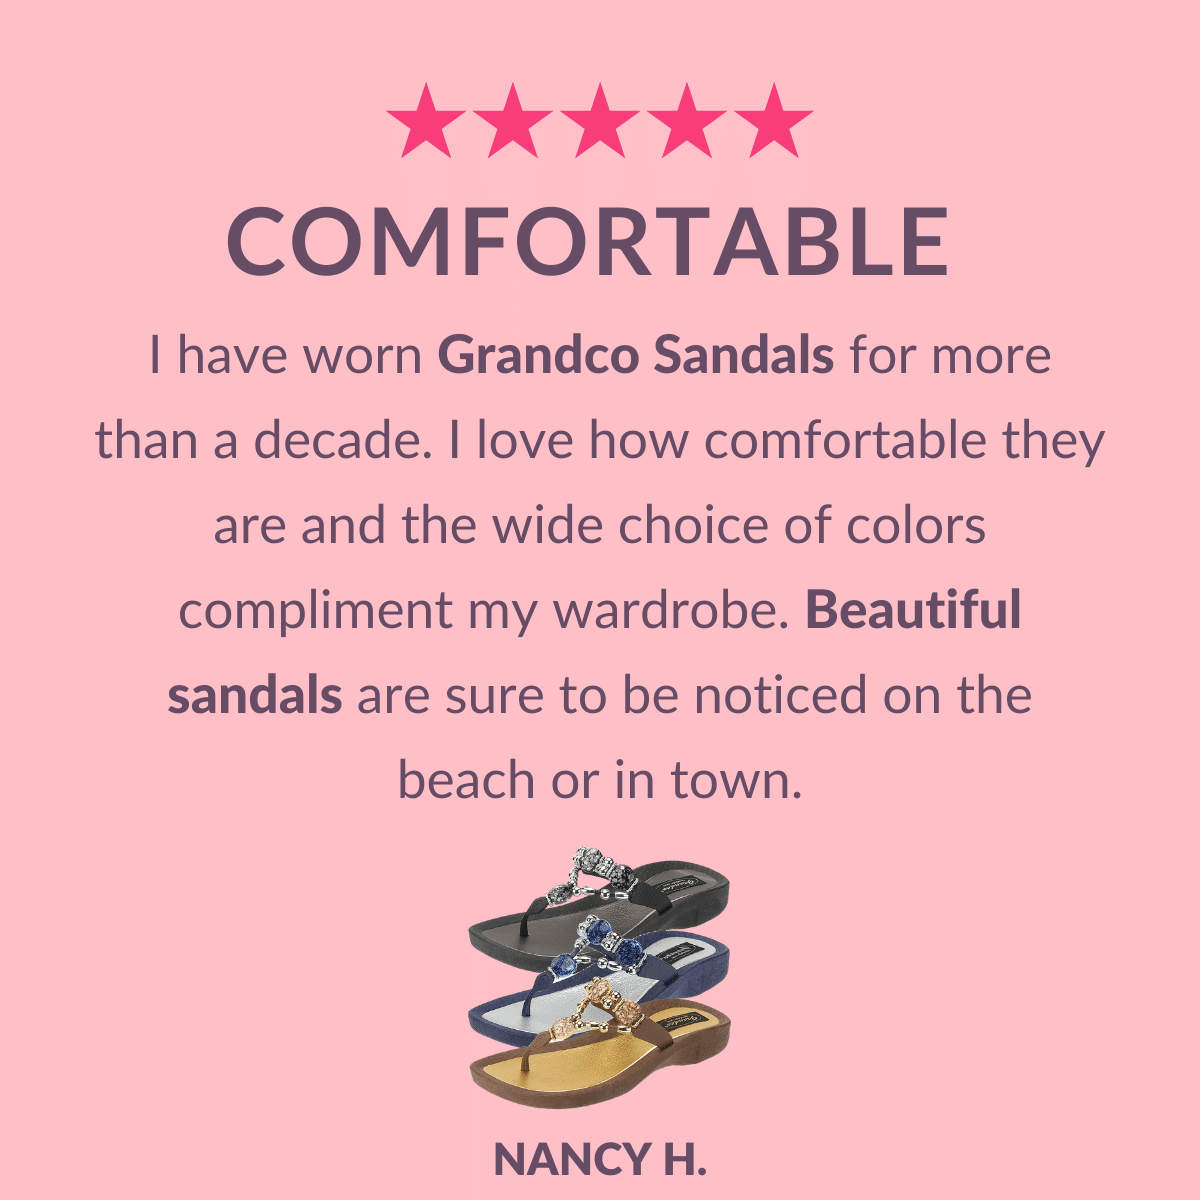 Grandco Sandals Customer Review of Expression Sandal Style